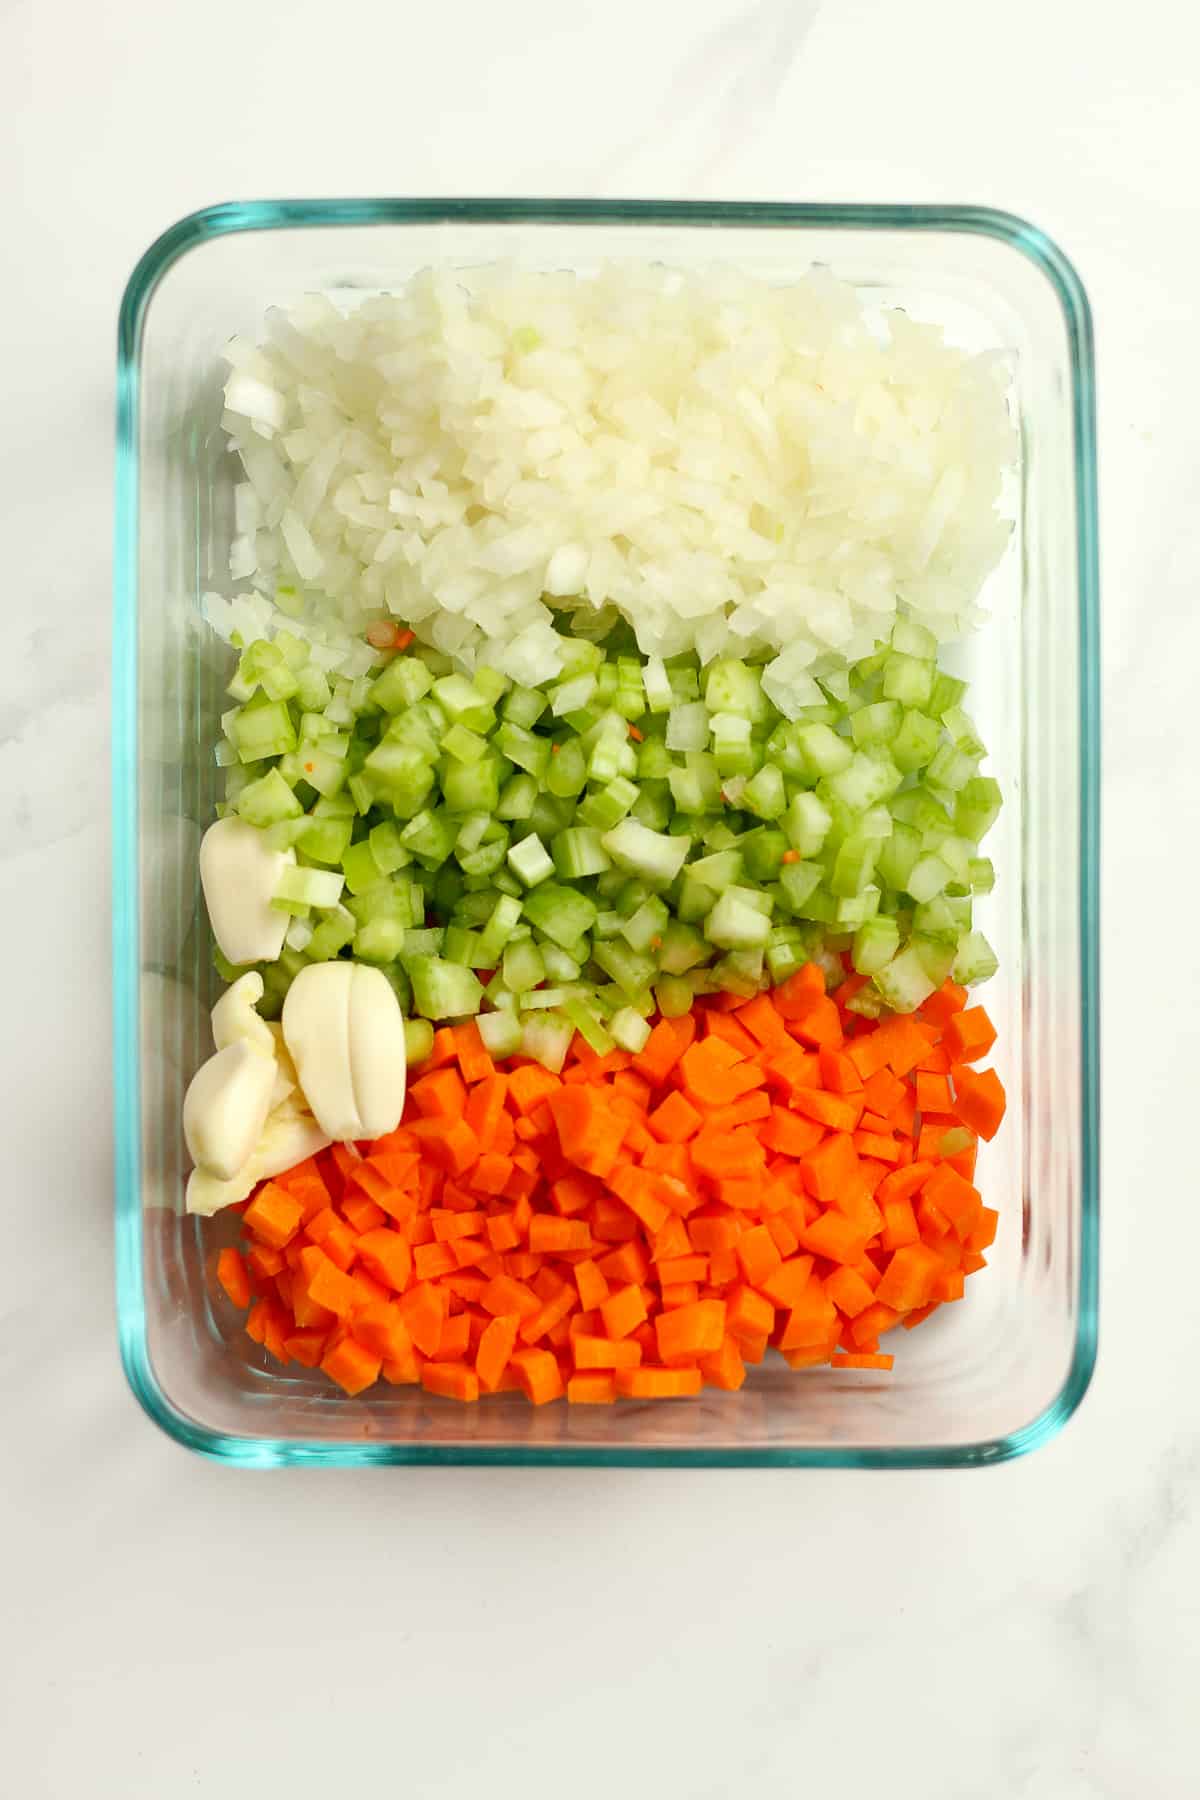 A dish of the diced veggies.